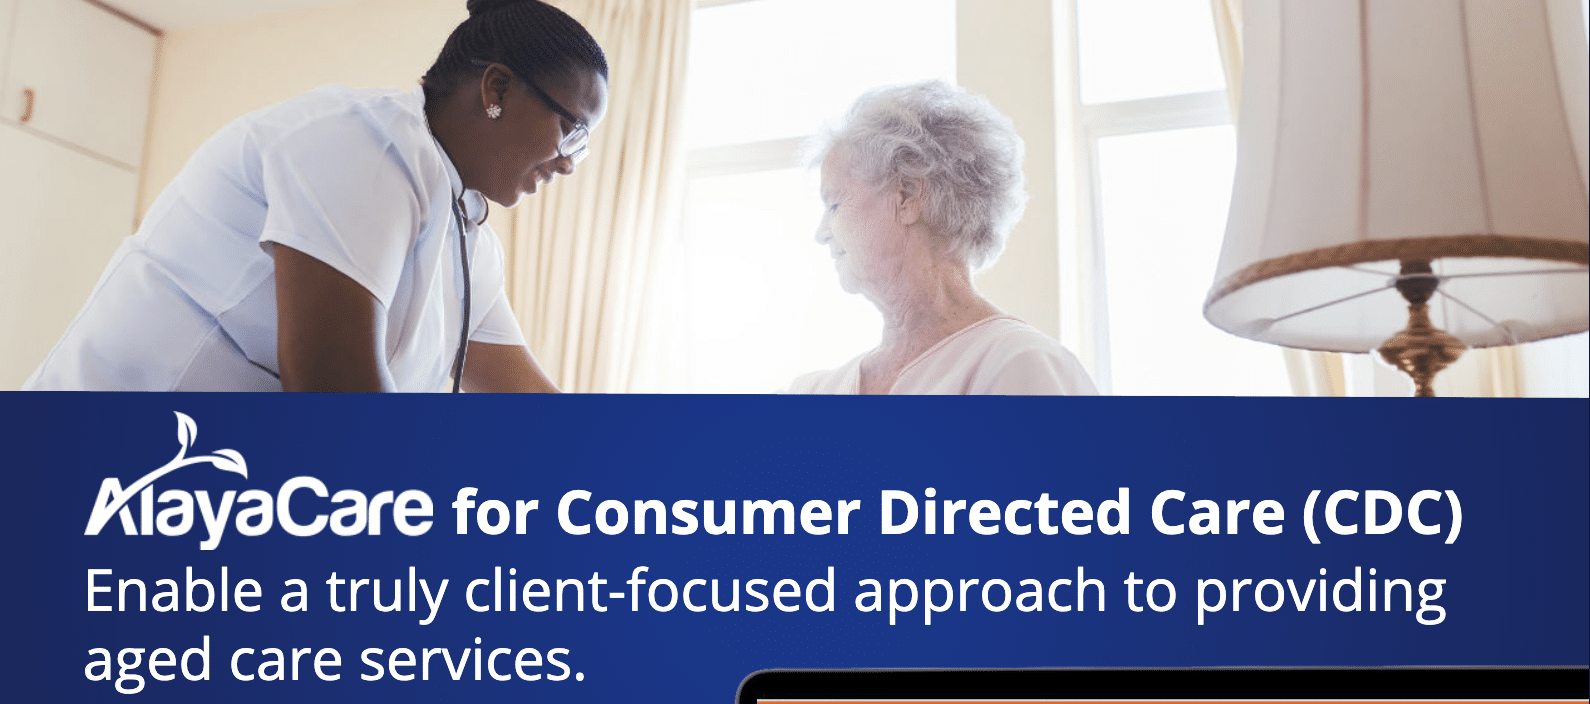 Alayacare for Consumer Directed Care